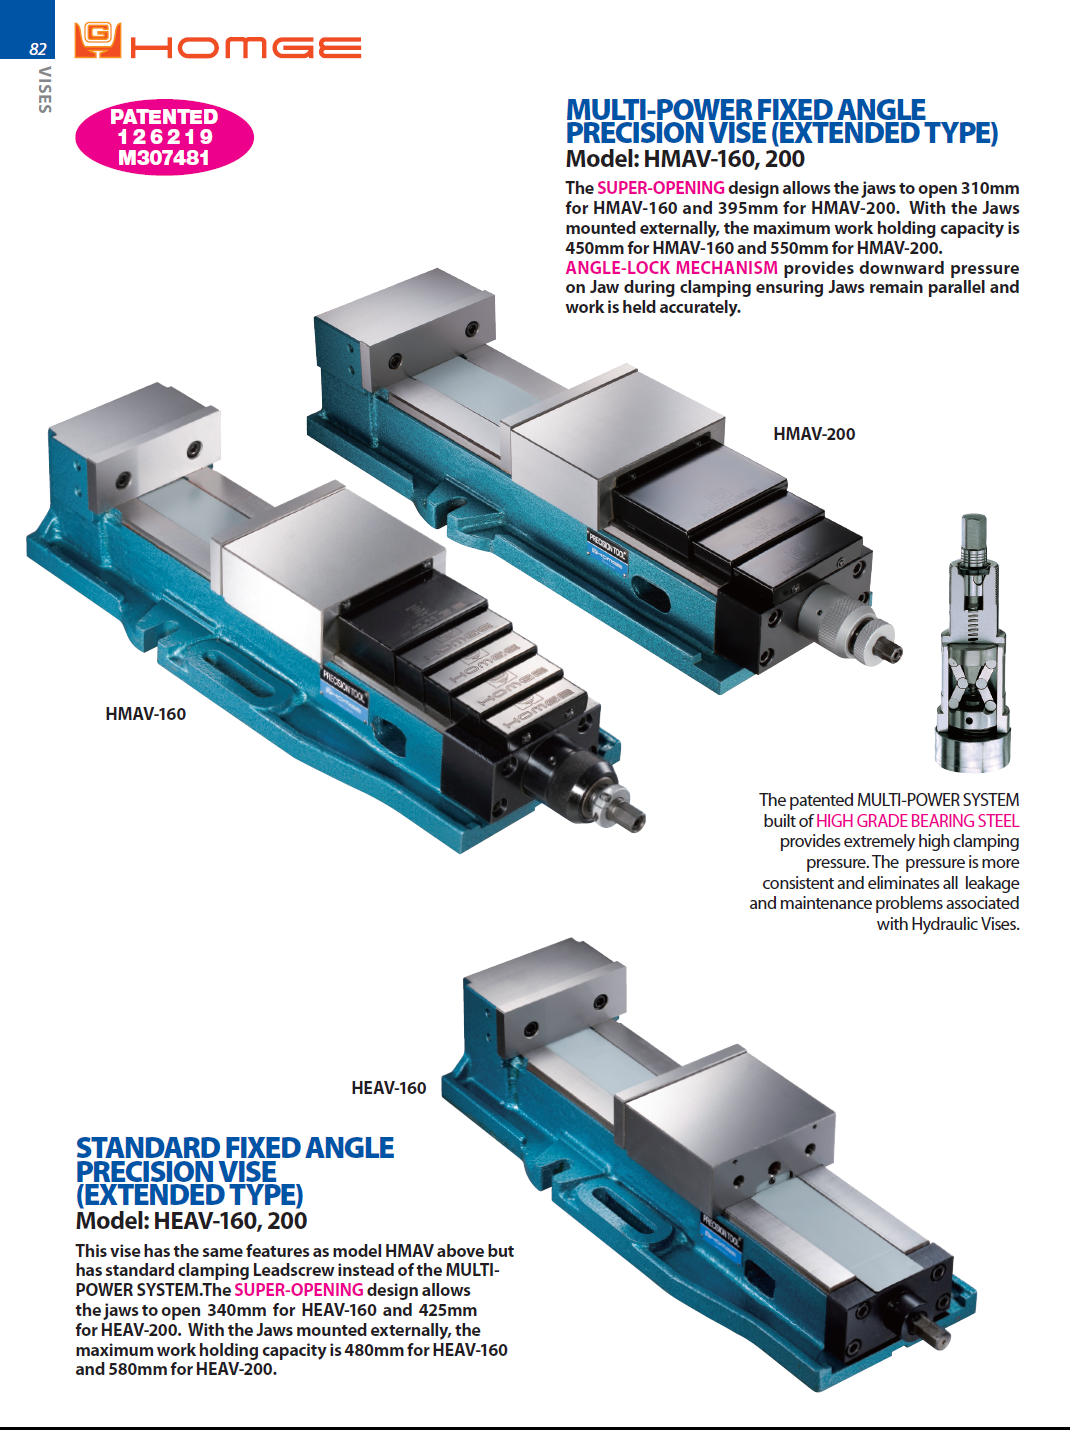 Catalog|MULTI-POWER FIXED ANGLE PRECISION VISE (EXTENDED TYPE)